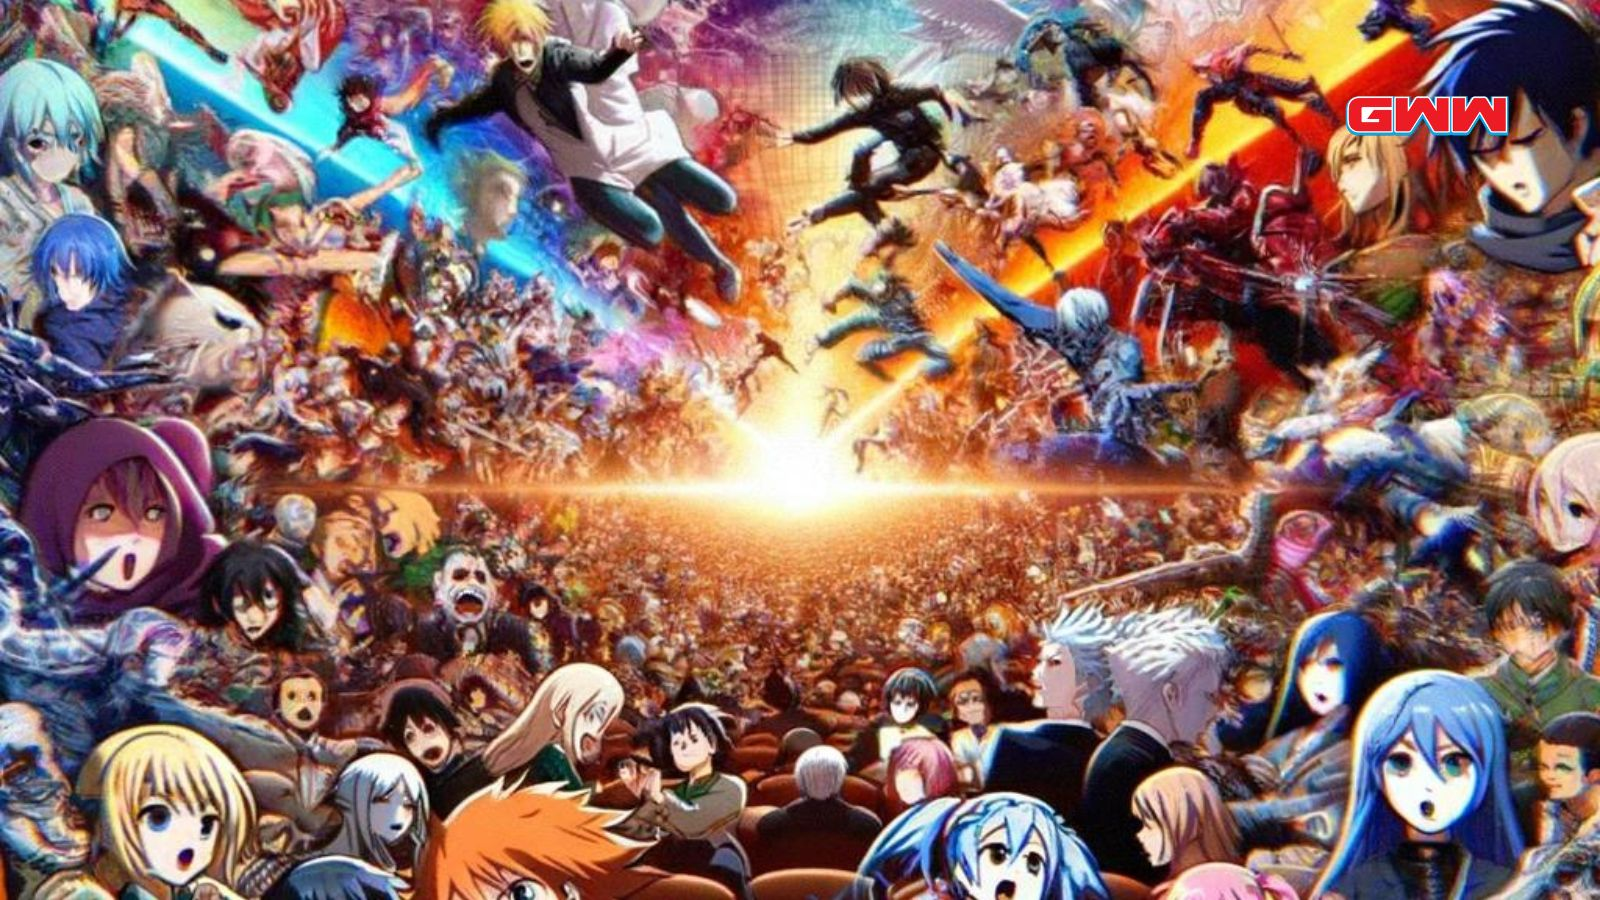 Spectacular display of anime GIFs' role in fandom